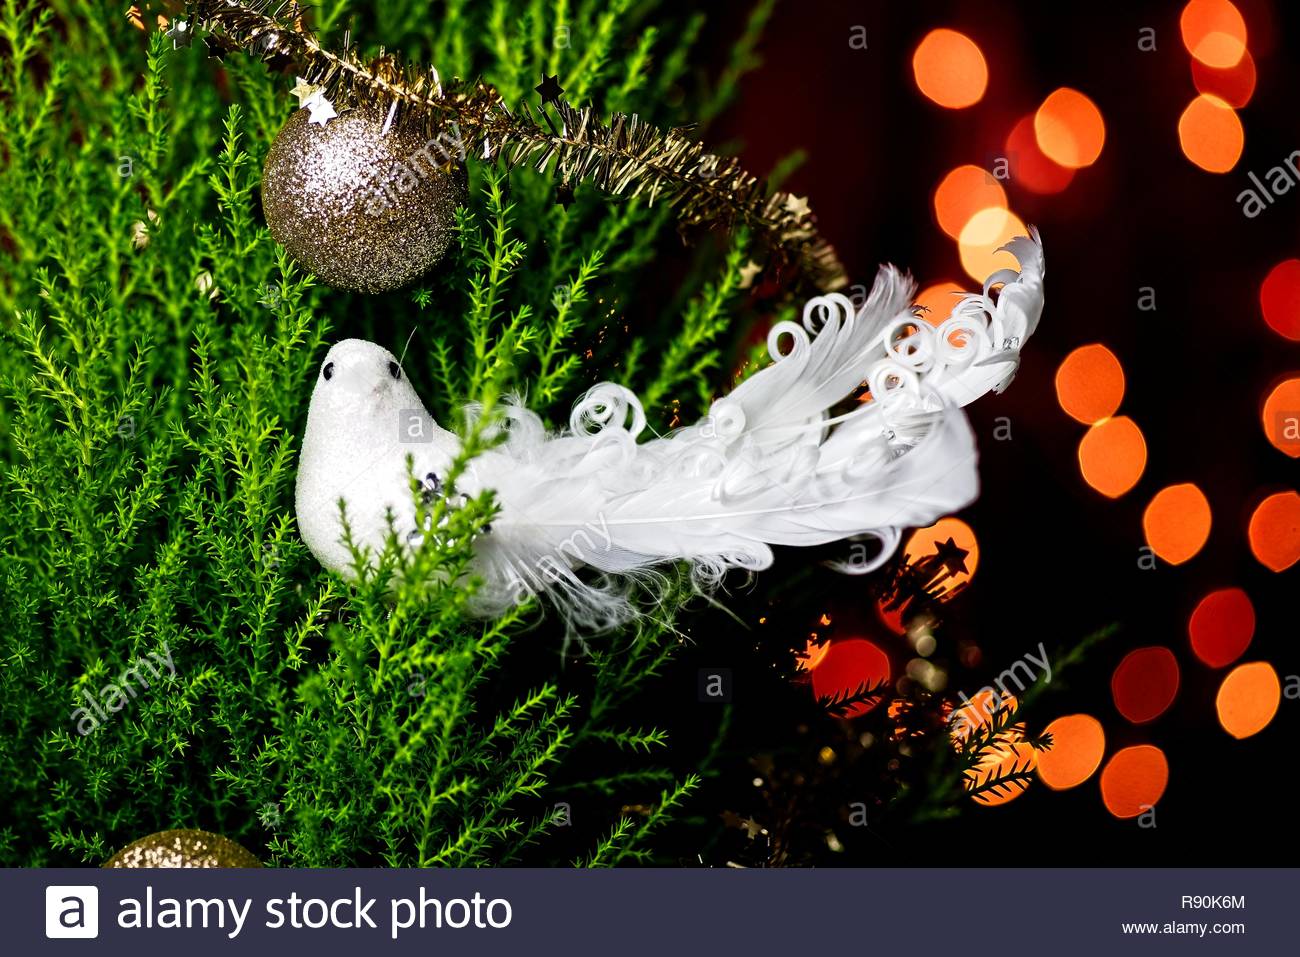 Christmas Scene With Bird On The Tree And Background Lights Stock